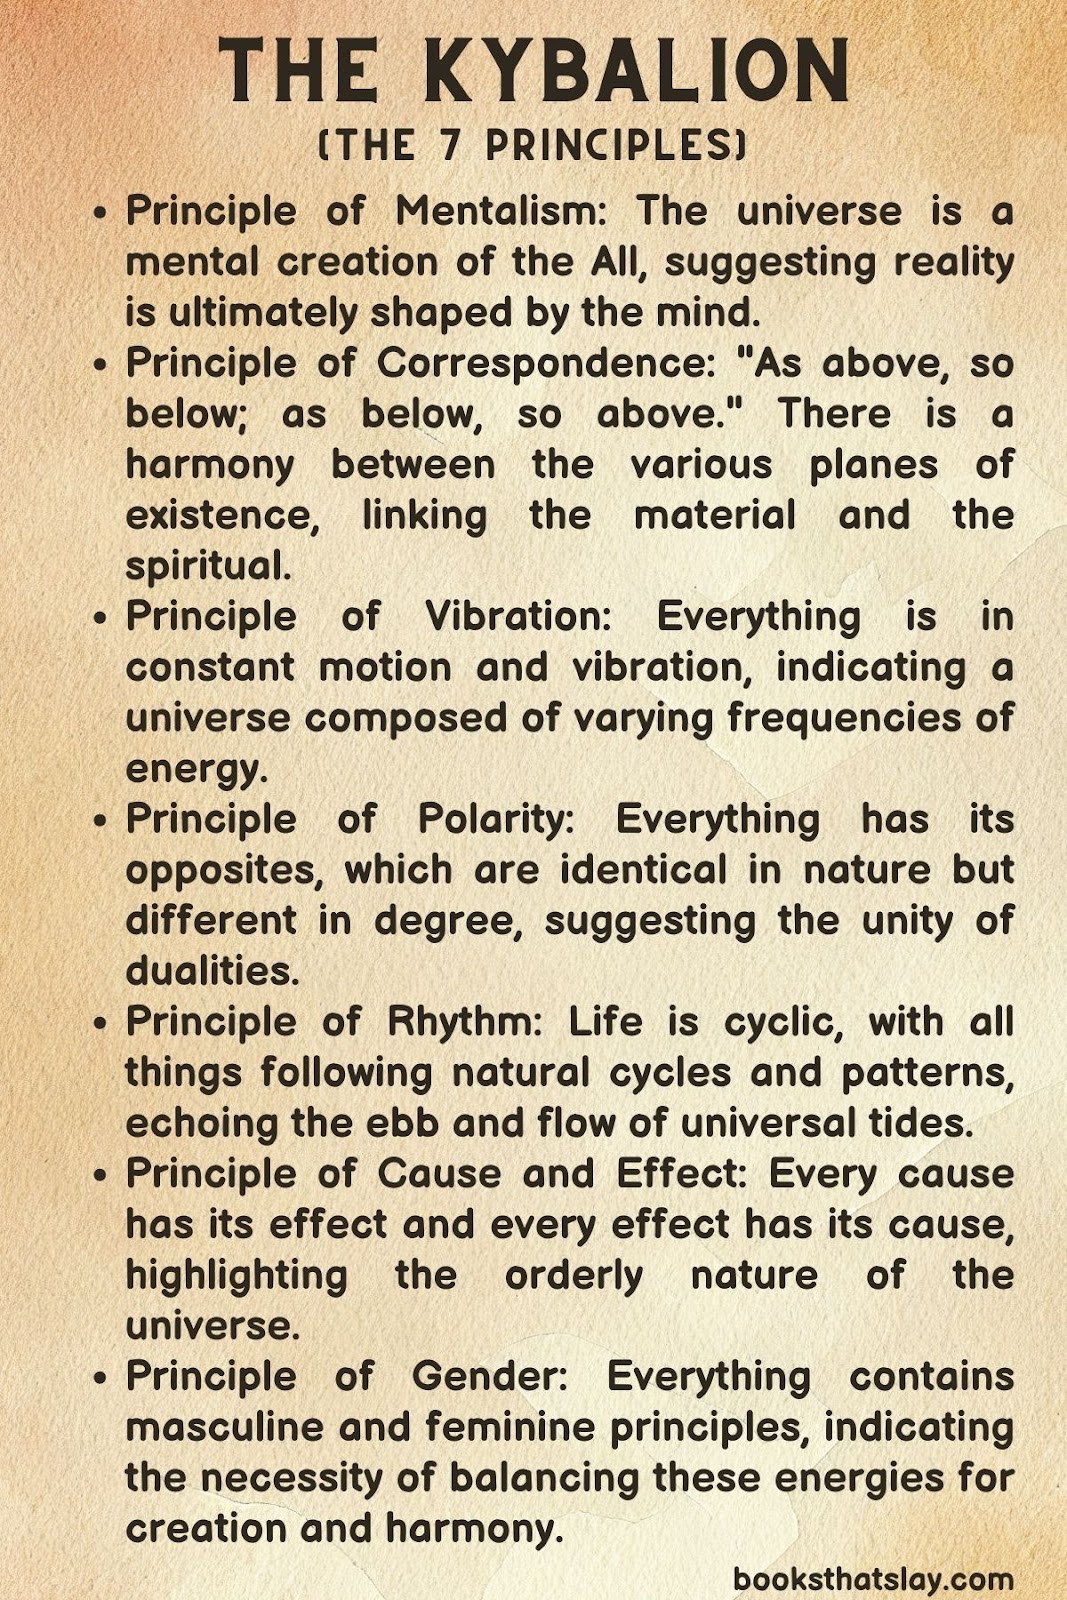 All 7 Principles of The Kybalion